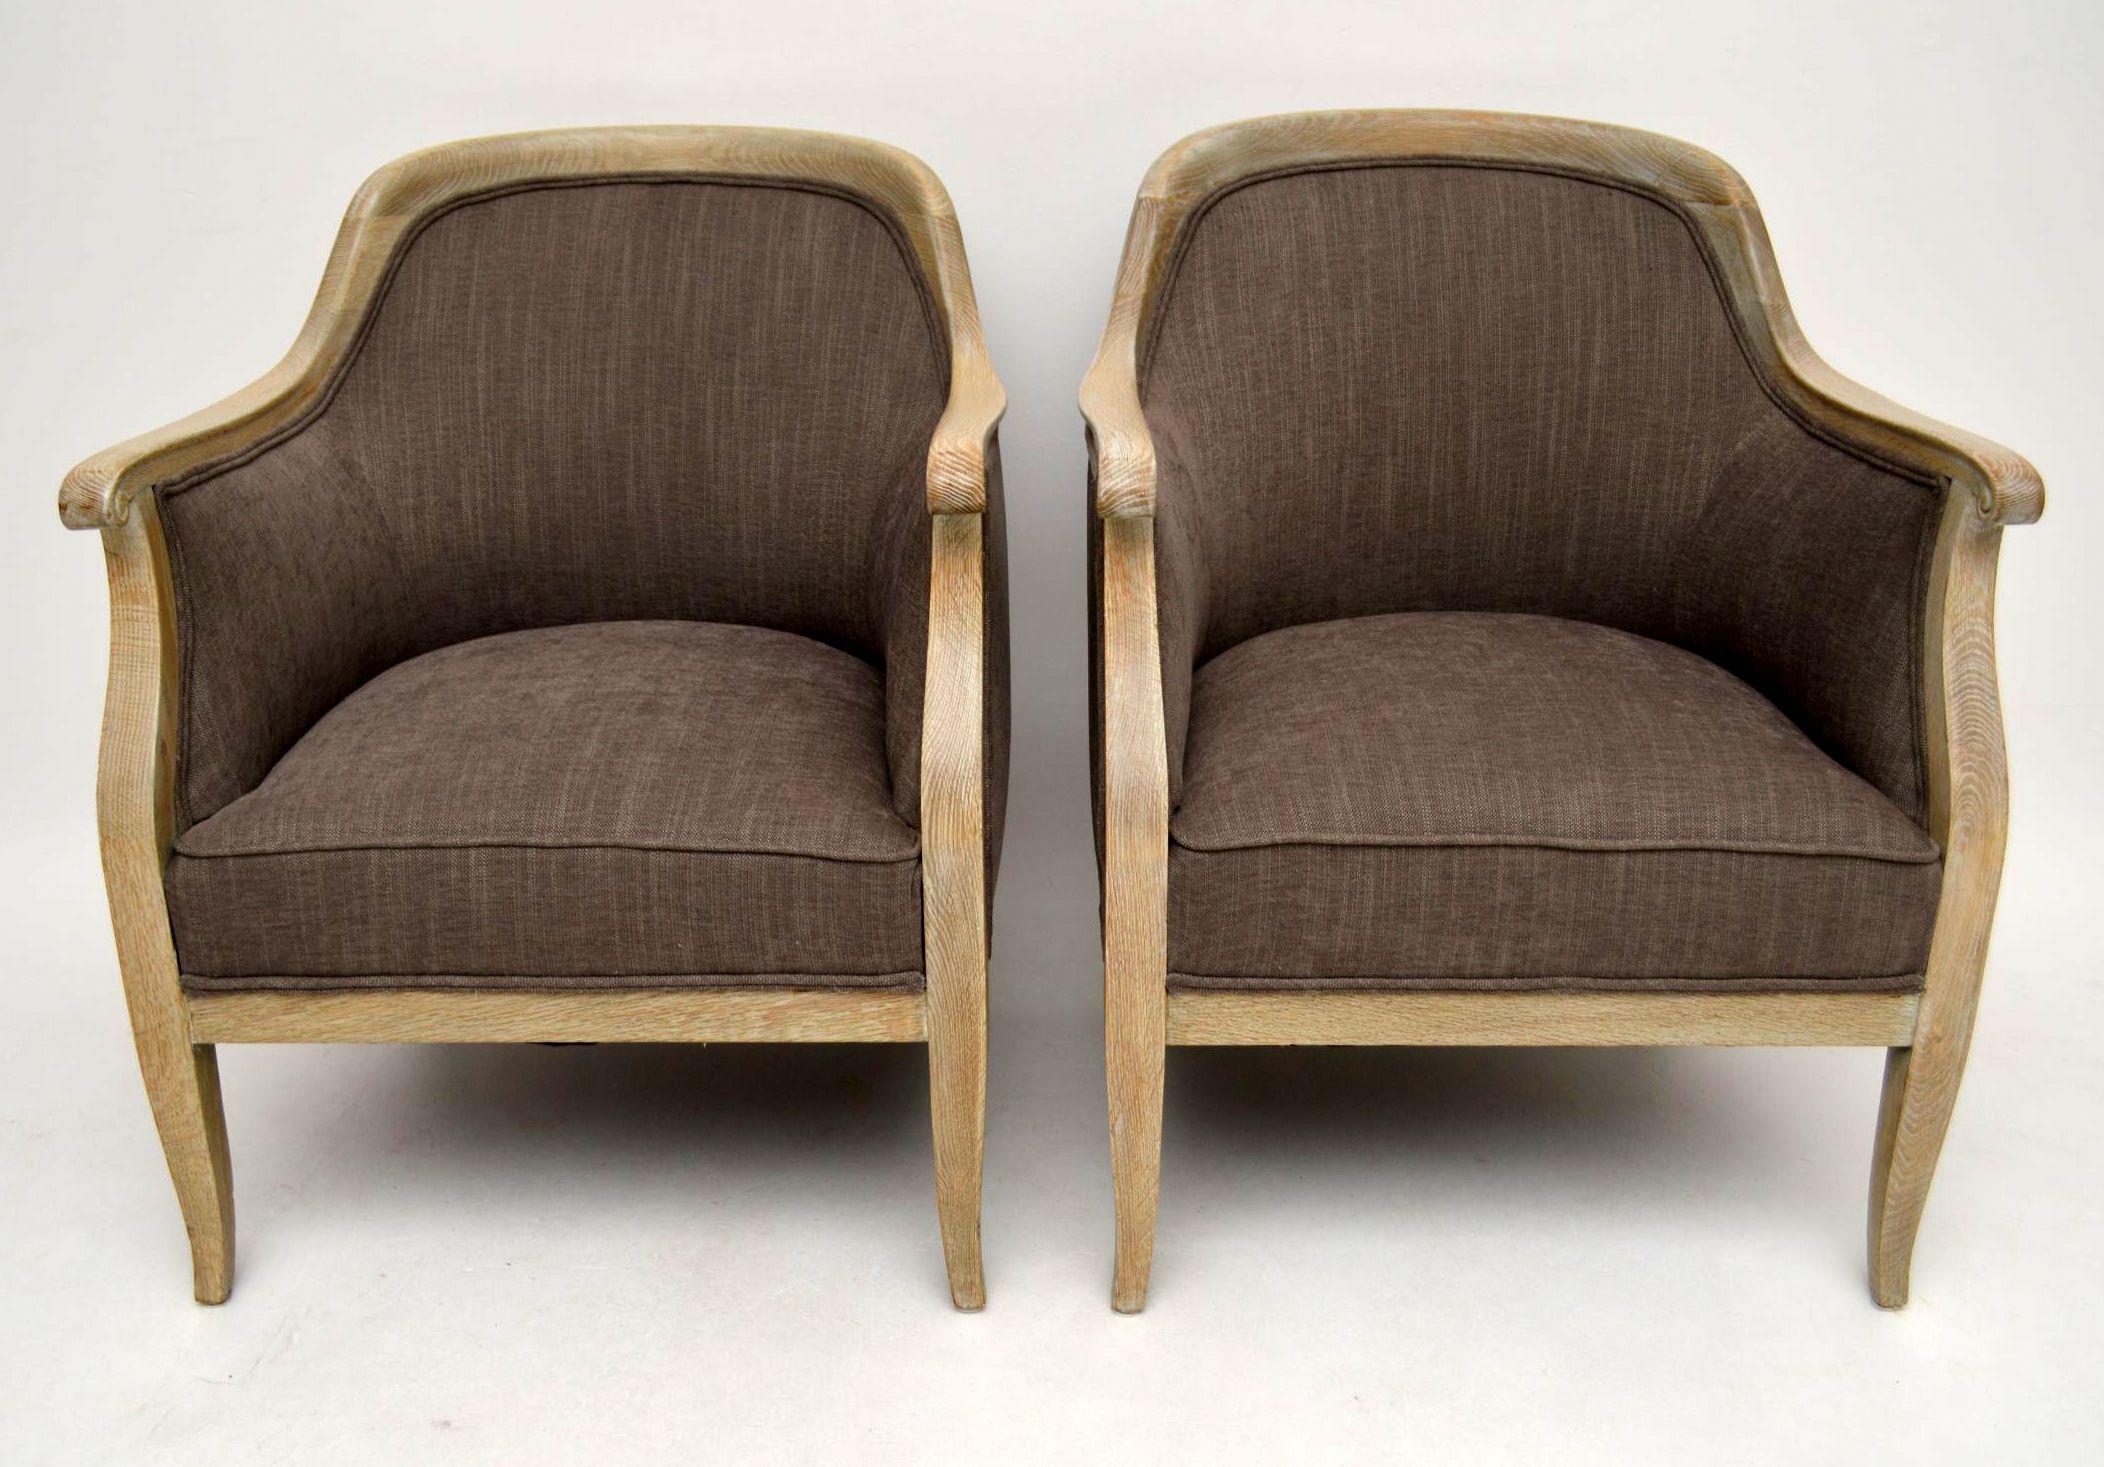 Late 19th Century Pair of Antique Swedish Bleached Oak Upholstered Armchairs